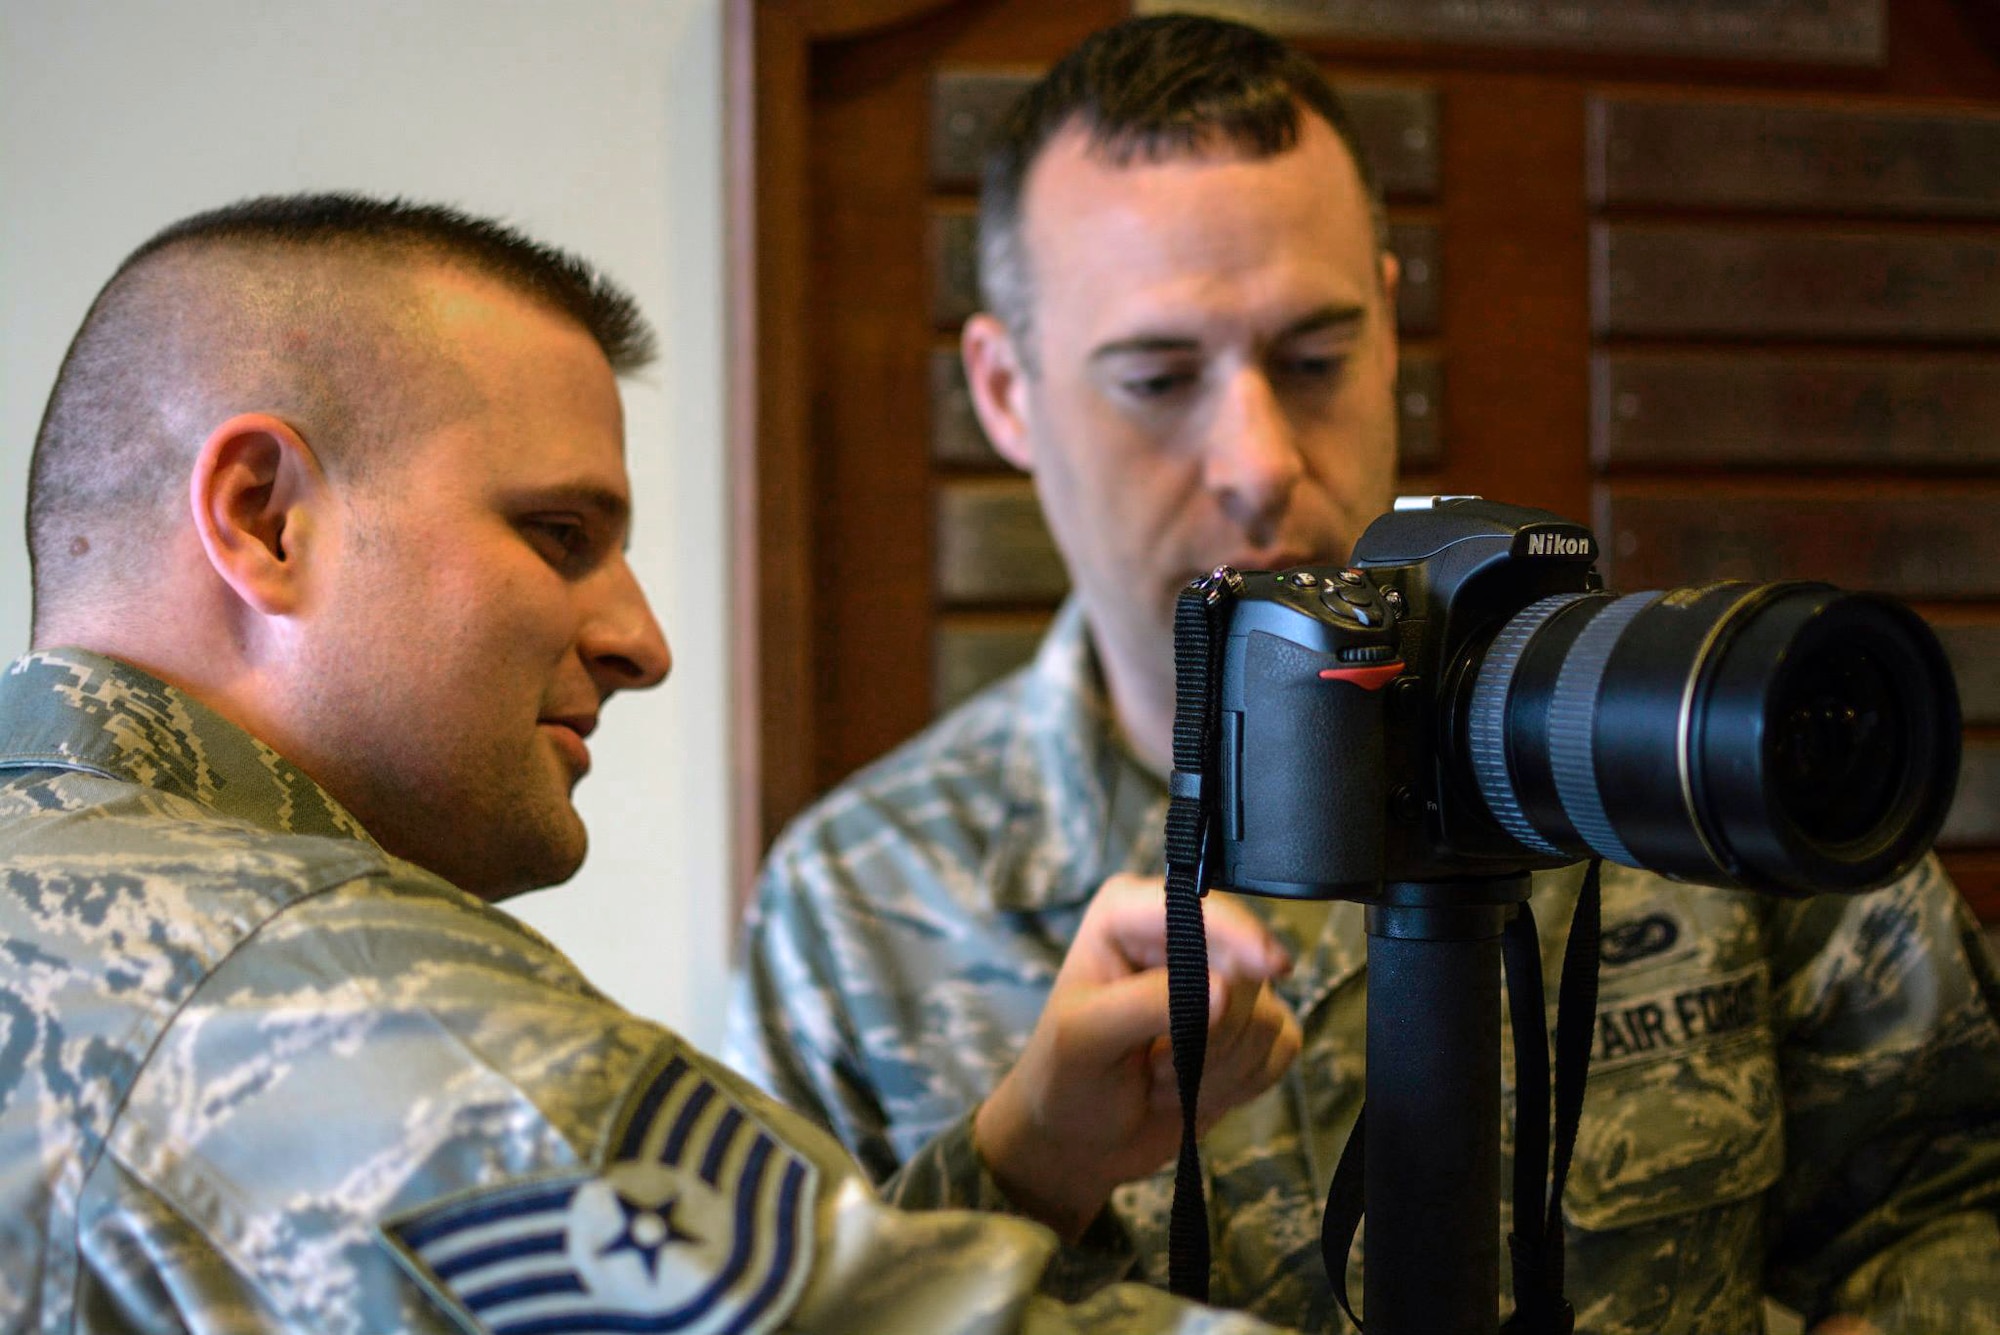 Tech. Sgt. Mark Orders-Woempner and Staff Sgt. Andrew McLaughlin, from 437th Air Refueling Wing at Grissem Air Force Base, Ind. practice newly learned skills during  a training course with the 1st Combat Camera Squadron this week. About 23 Air Force Reserve public affairs specialists from bases across the country showed up at Joint Base Charleston with an eagerness to improve their photo skills under the tutelage of some of the Air Force’s most elite photographers – 1st Combat Camera Airmen. (U.S. Air Force Reserve photo by Tech. Sgt. Shane Ellis)